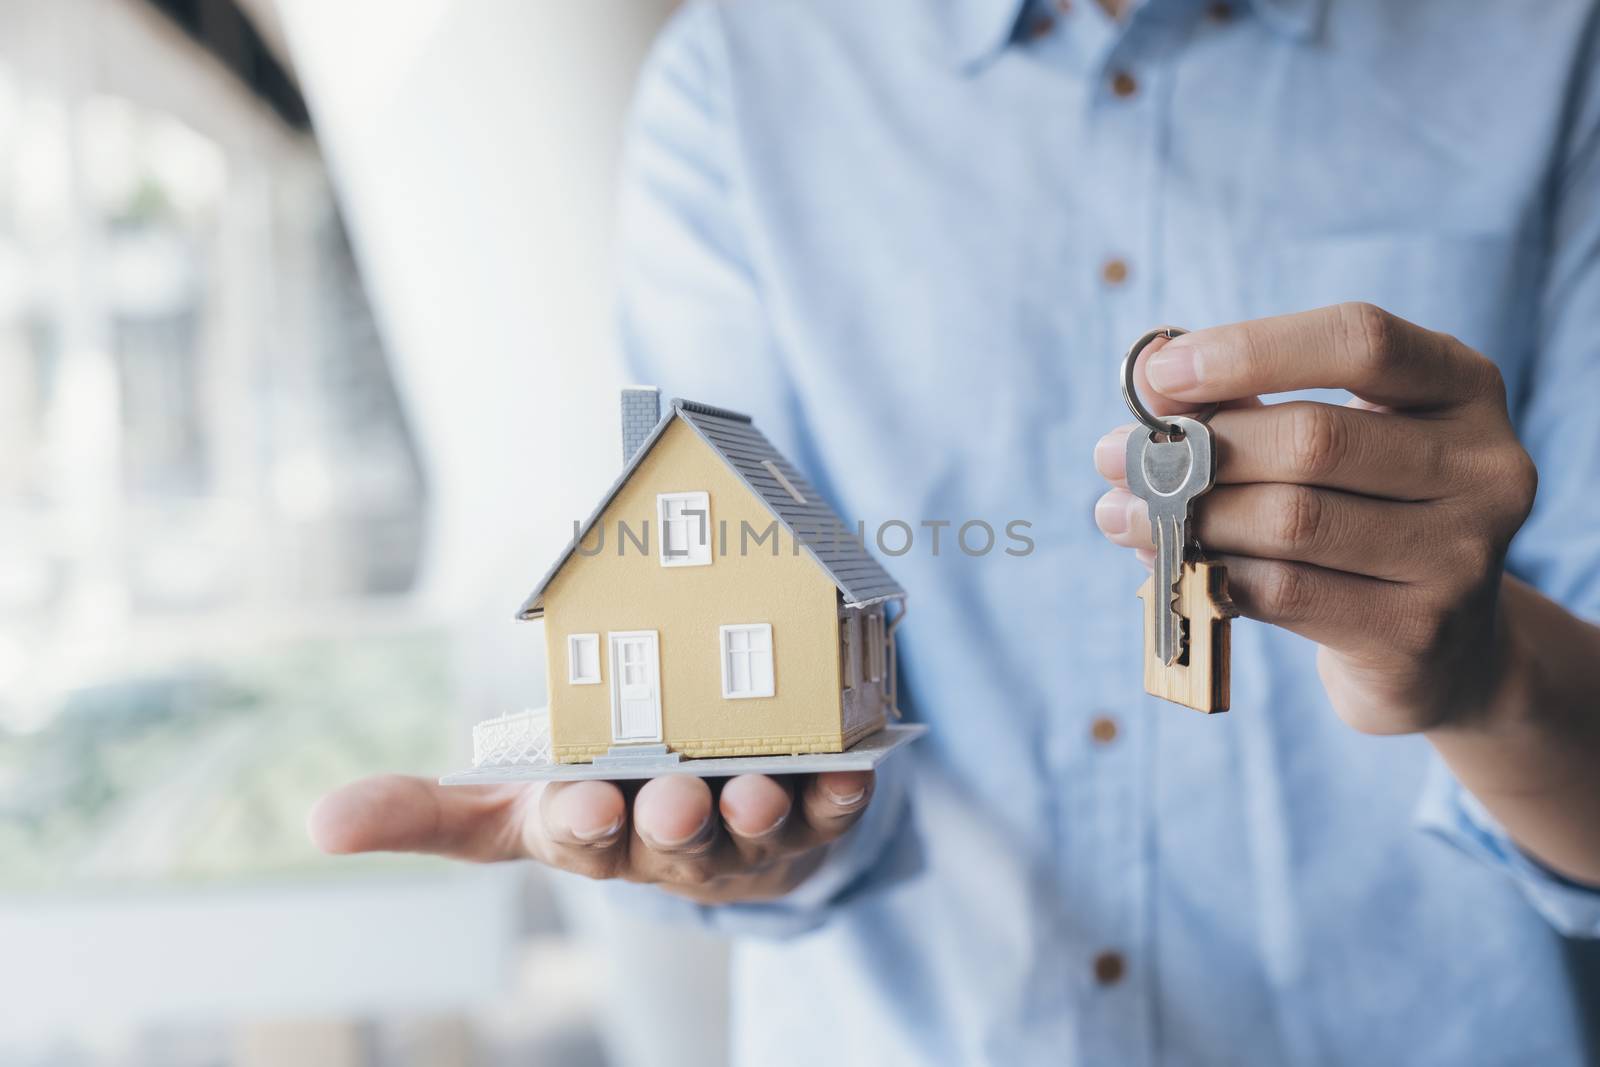 Real estate broker residential house rent listing contract. Offer of purchase house, rental of Real Estate. Giving, offering, demonstration, holding house keys.